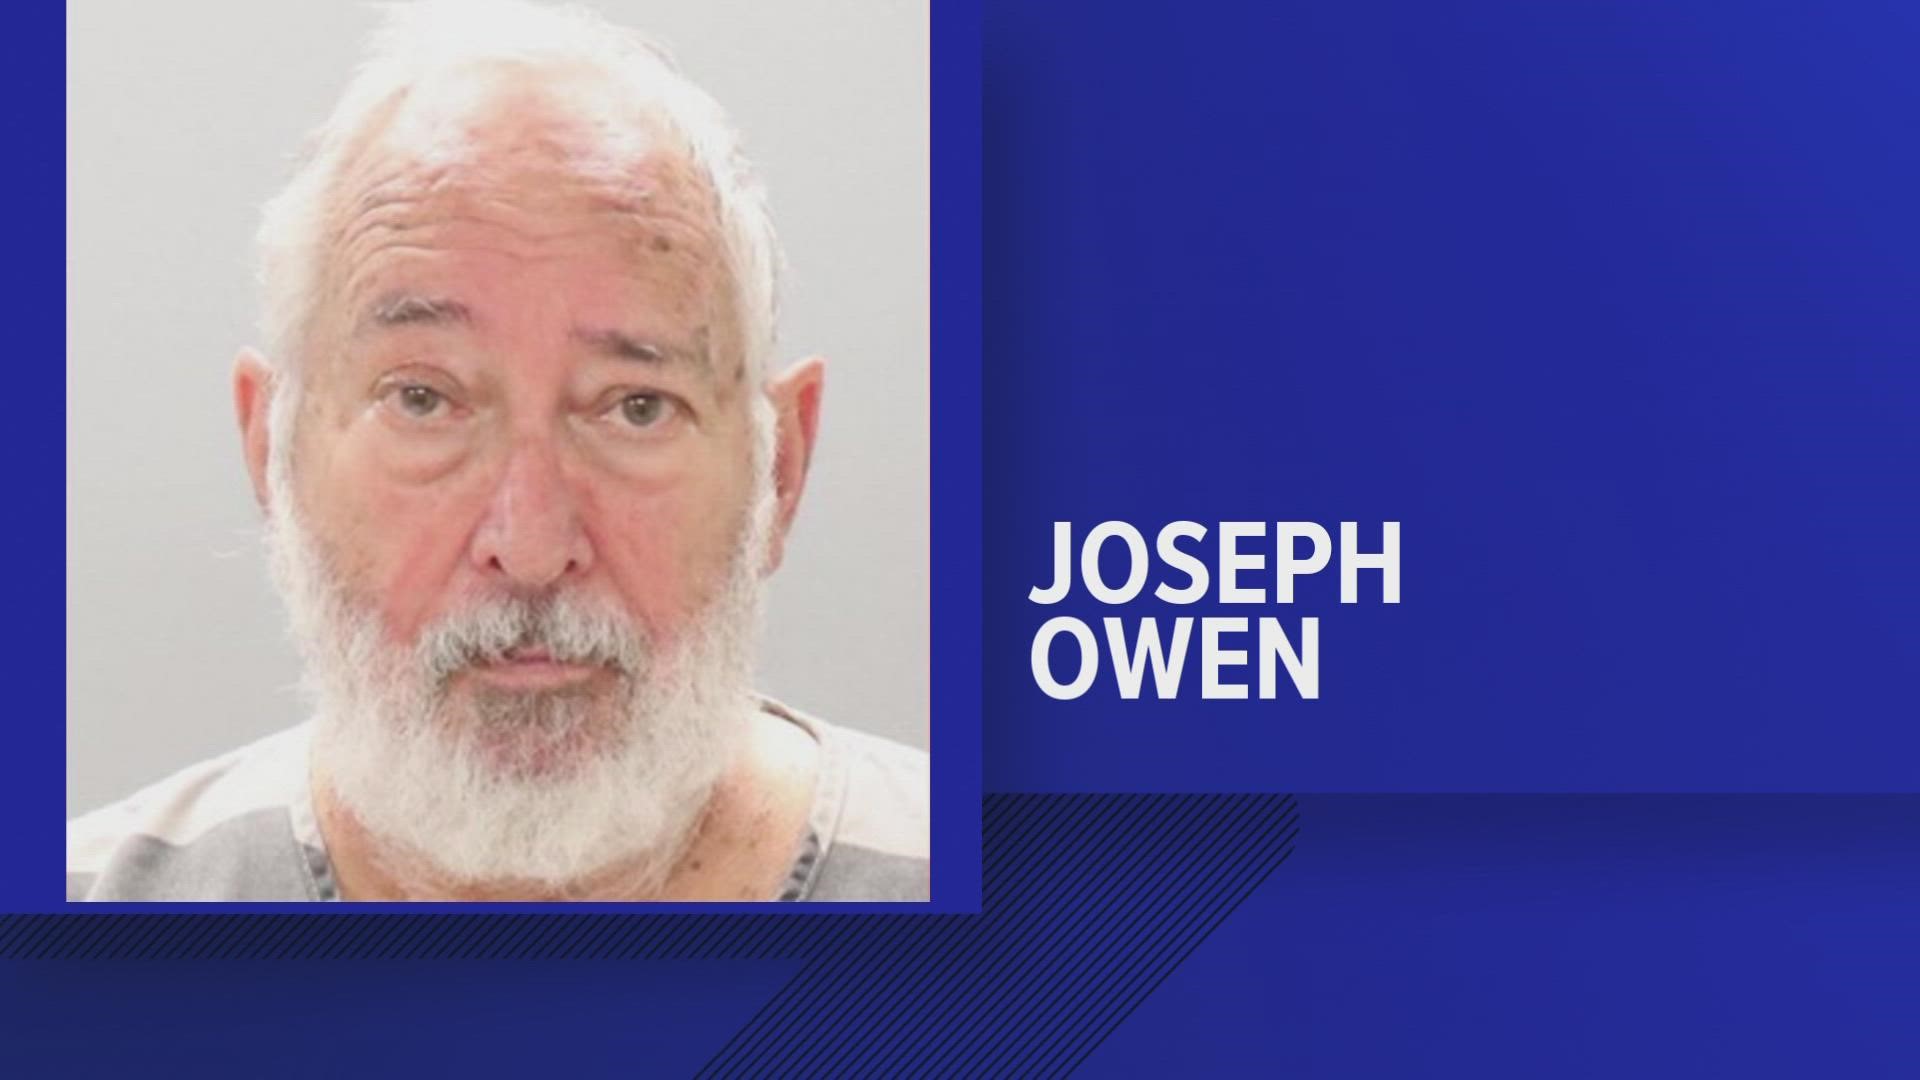 Joseph Steven Owen pleaded guilty as charged to two counts of rape of a child and three counts of aggravated sexual battery, the DA said.